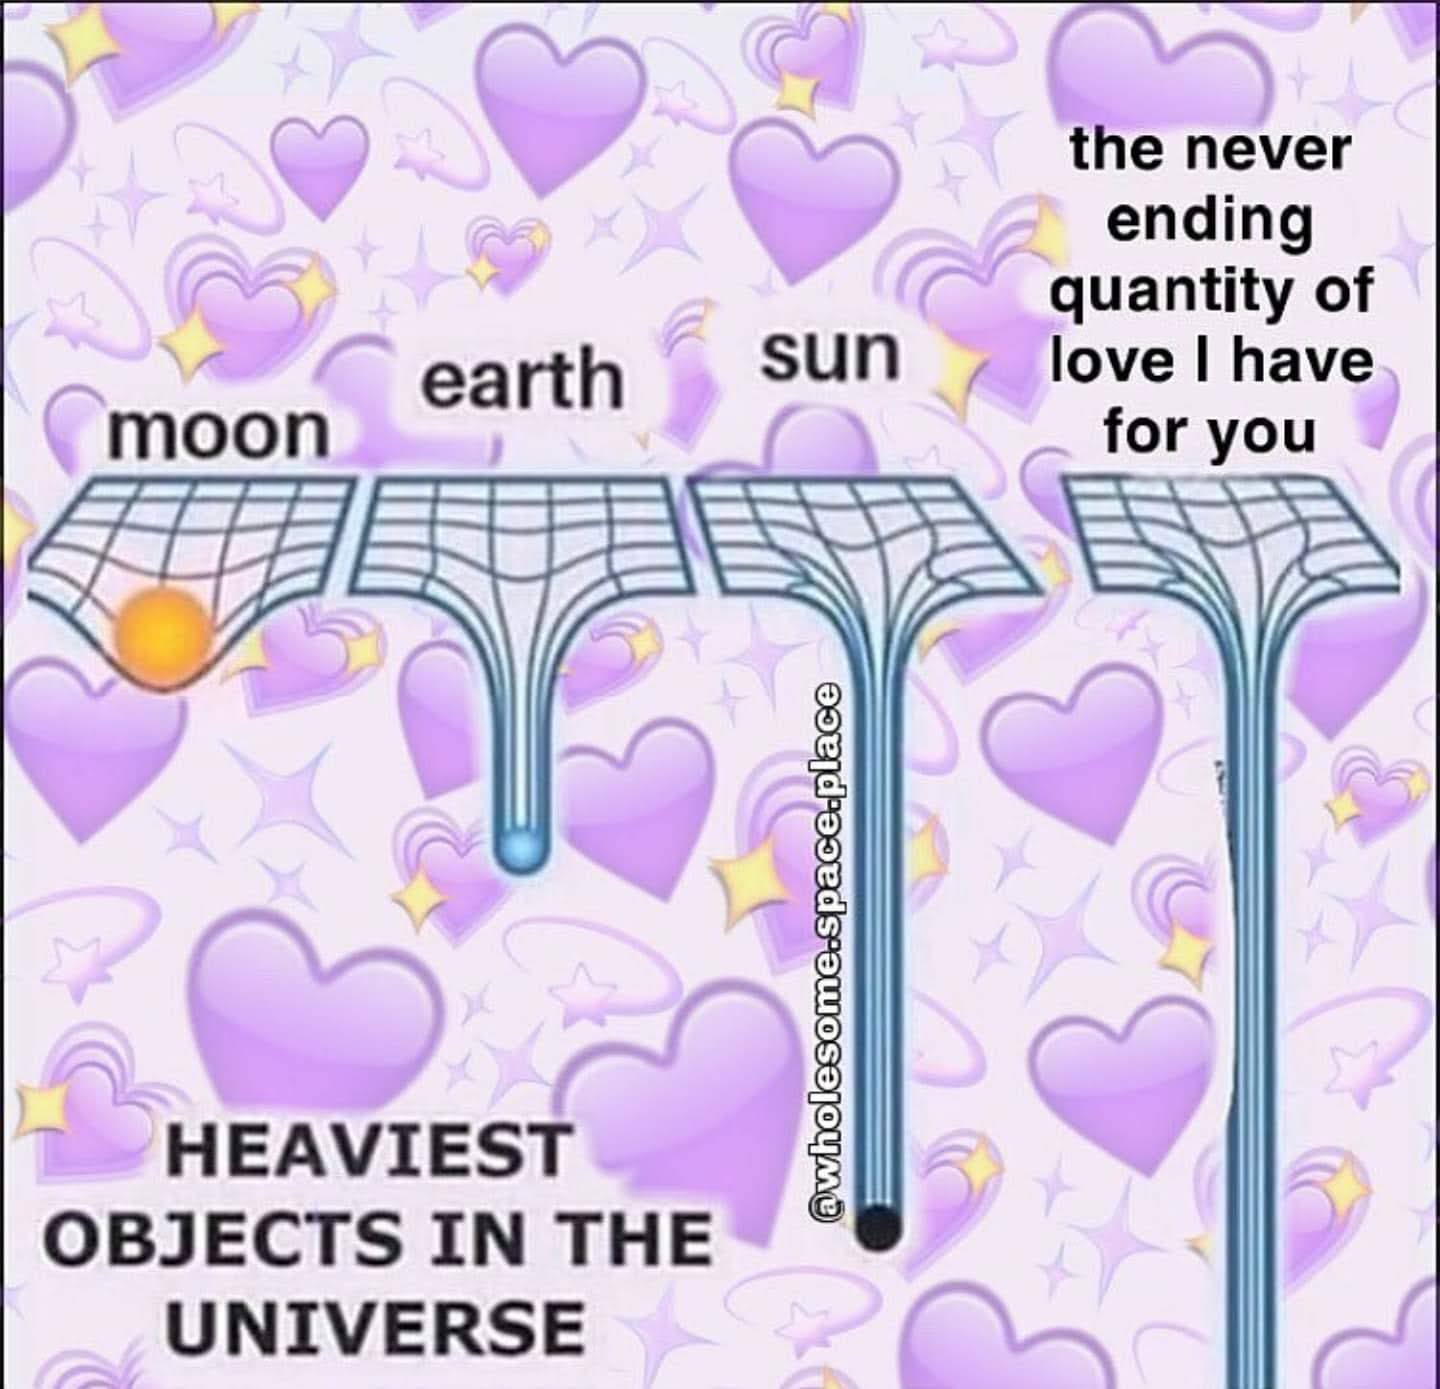 A meme displaying heaviest objects in the universe, with the last and heaviest one being the neverending quantity of love I have for you